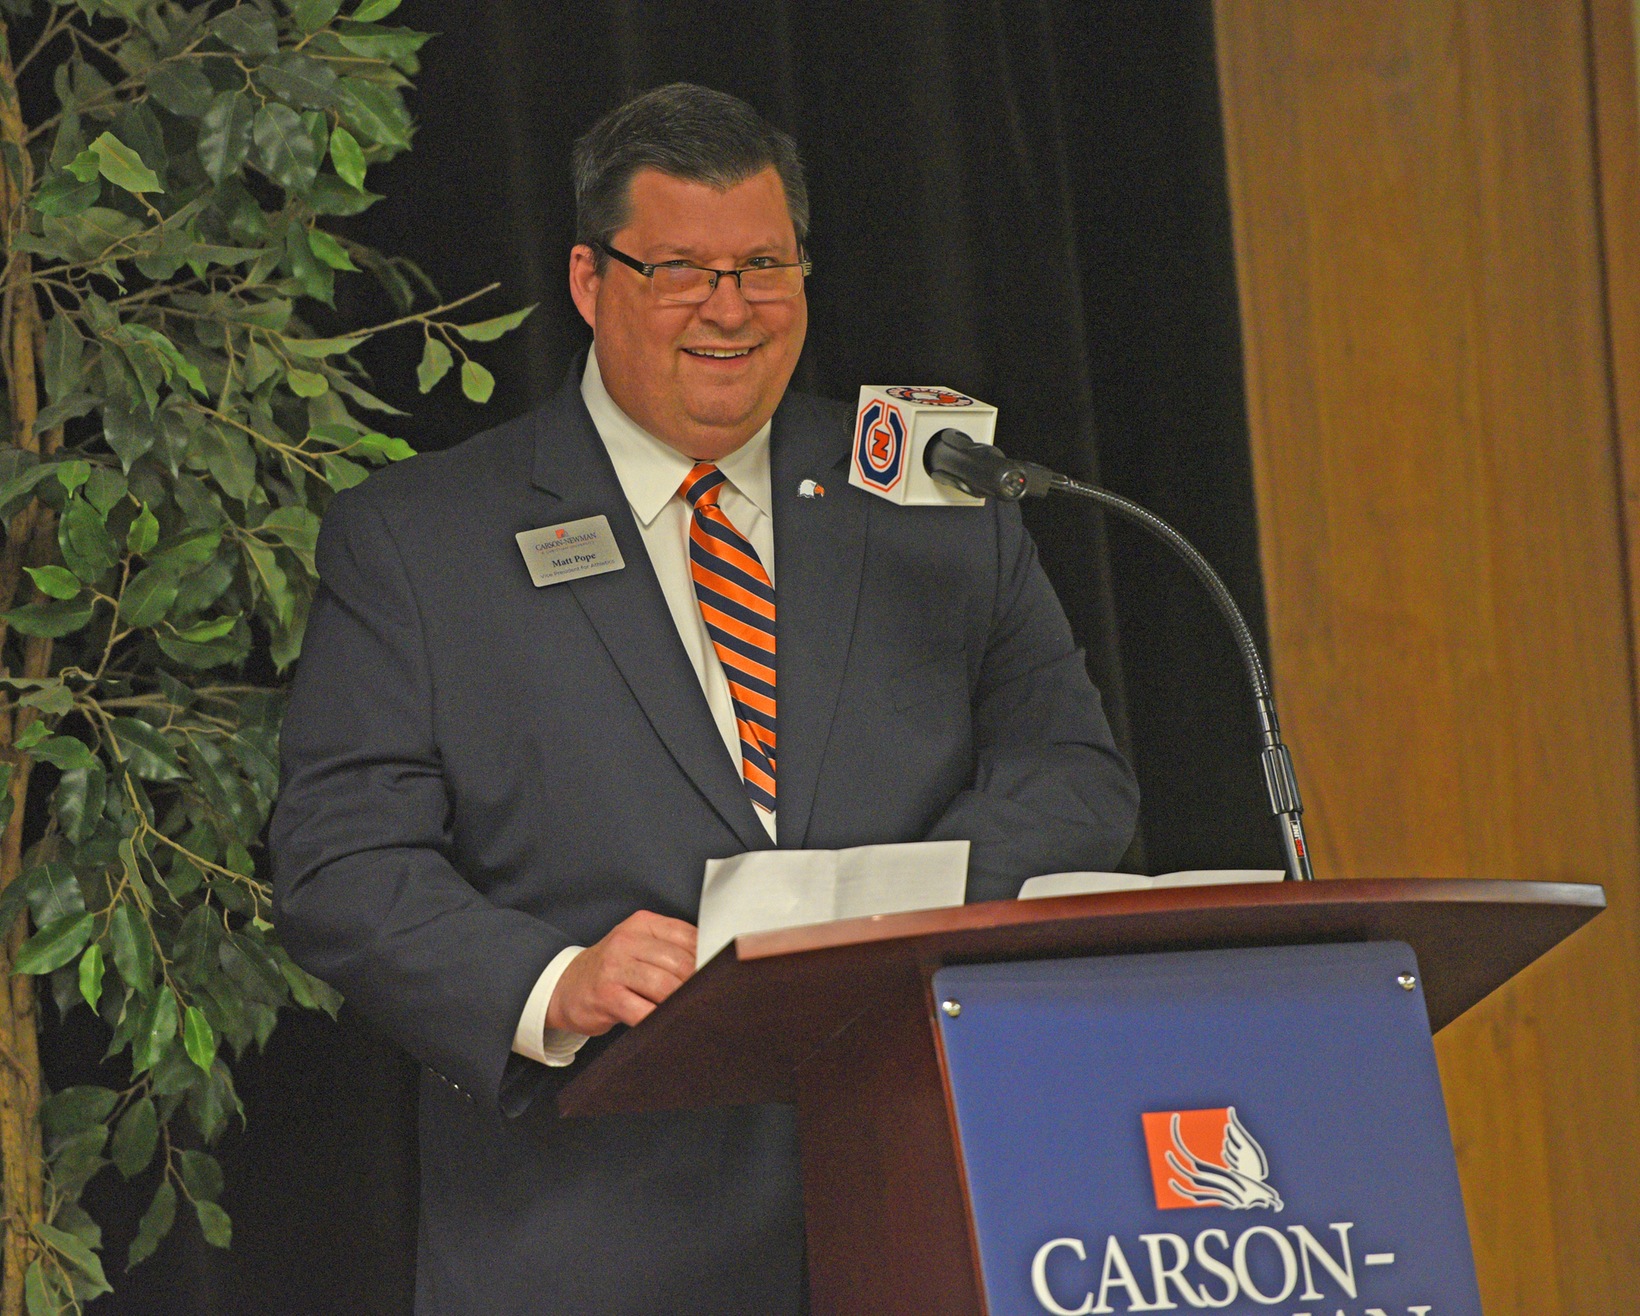 A letter from Carson-Newman Vice President for Athletics Matthew Pope